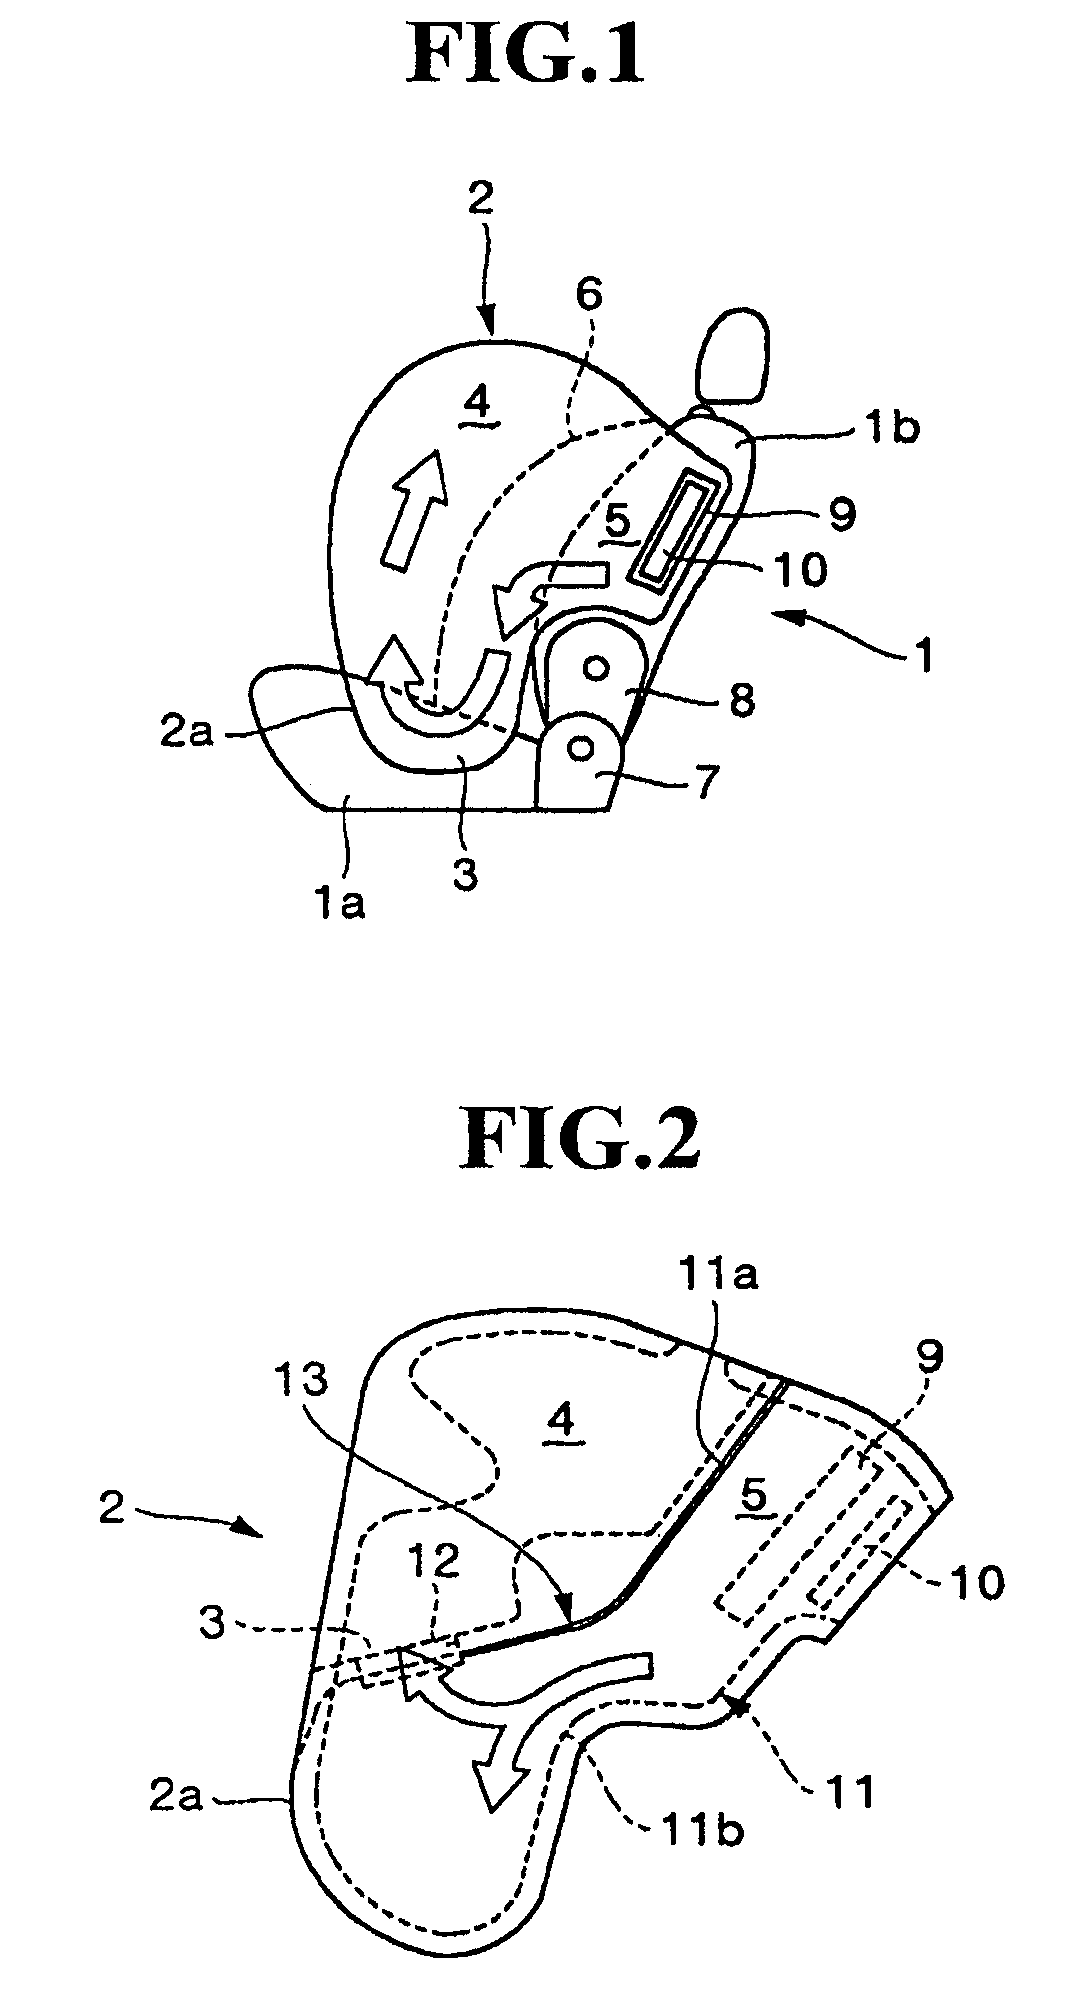 Side airbag apparatus for a vehicle